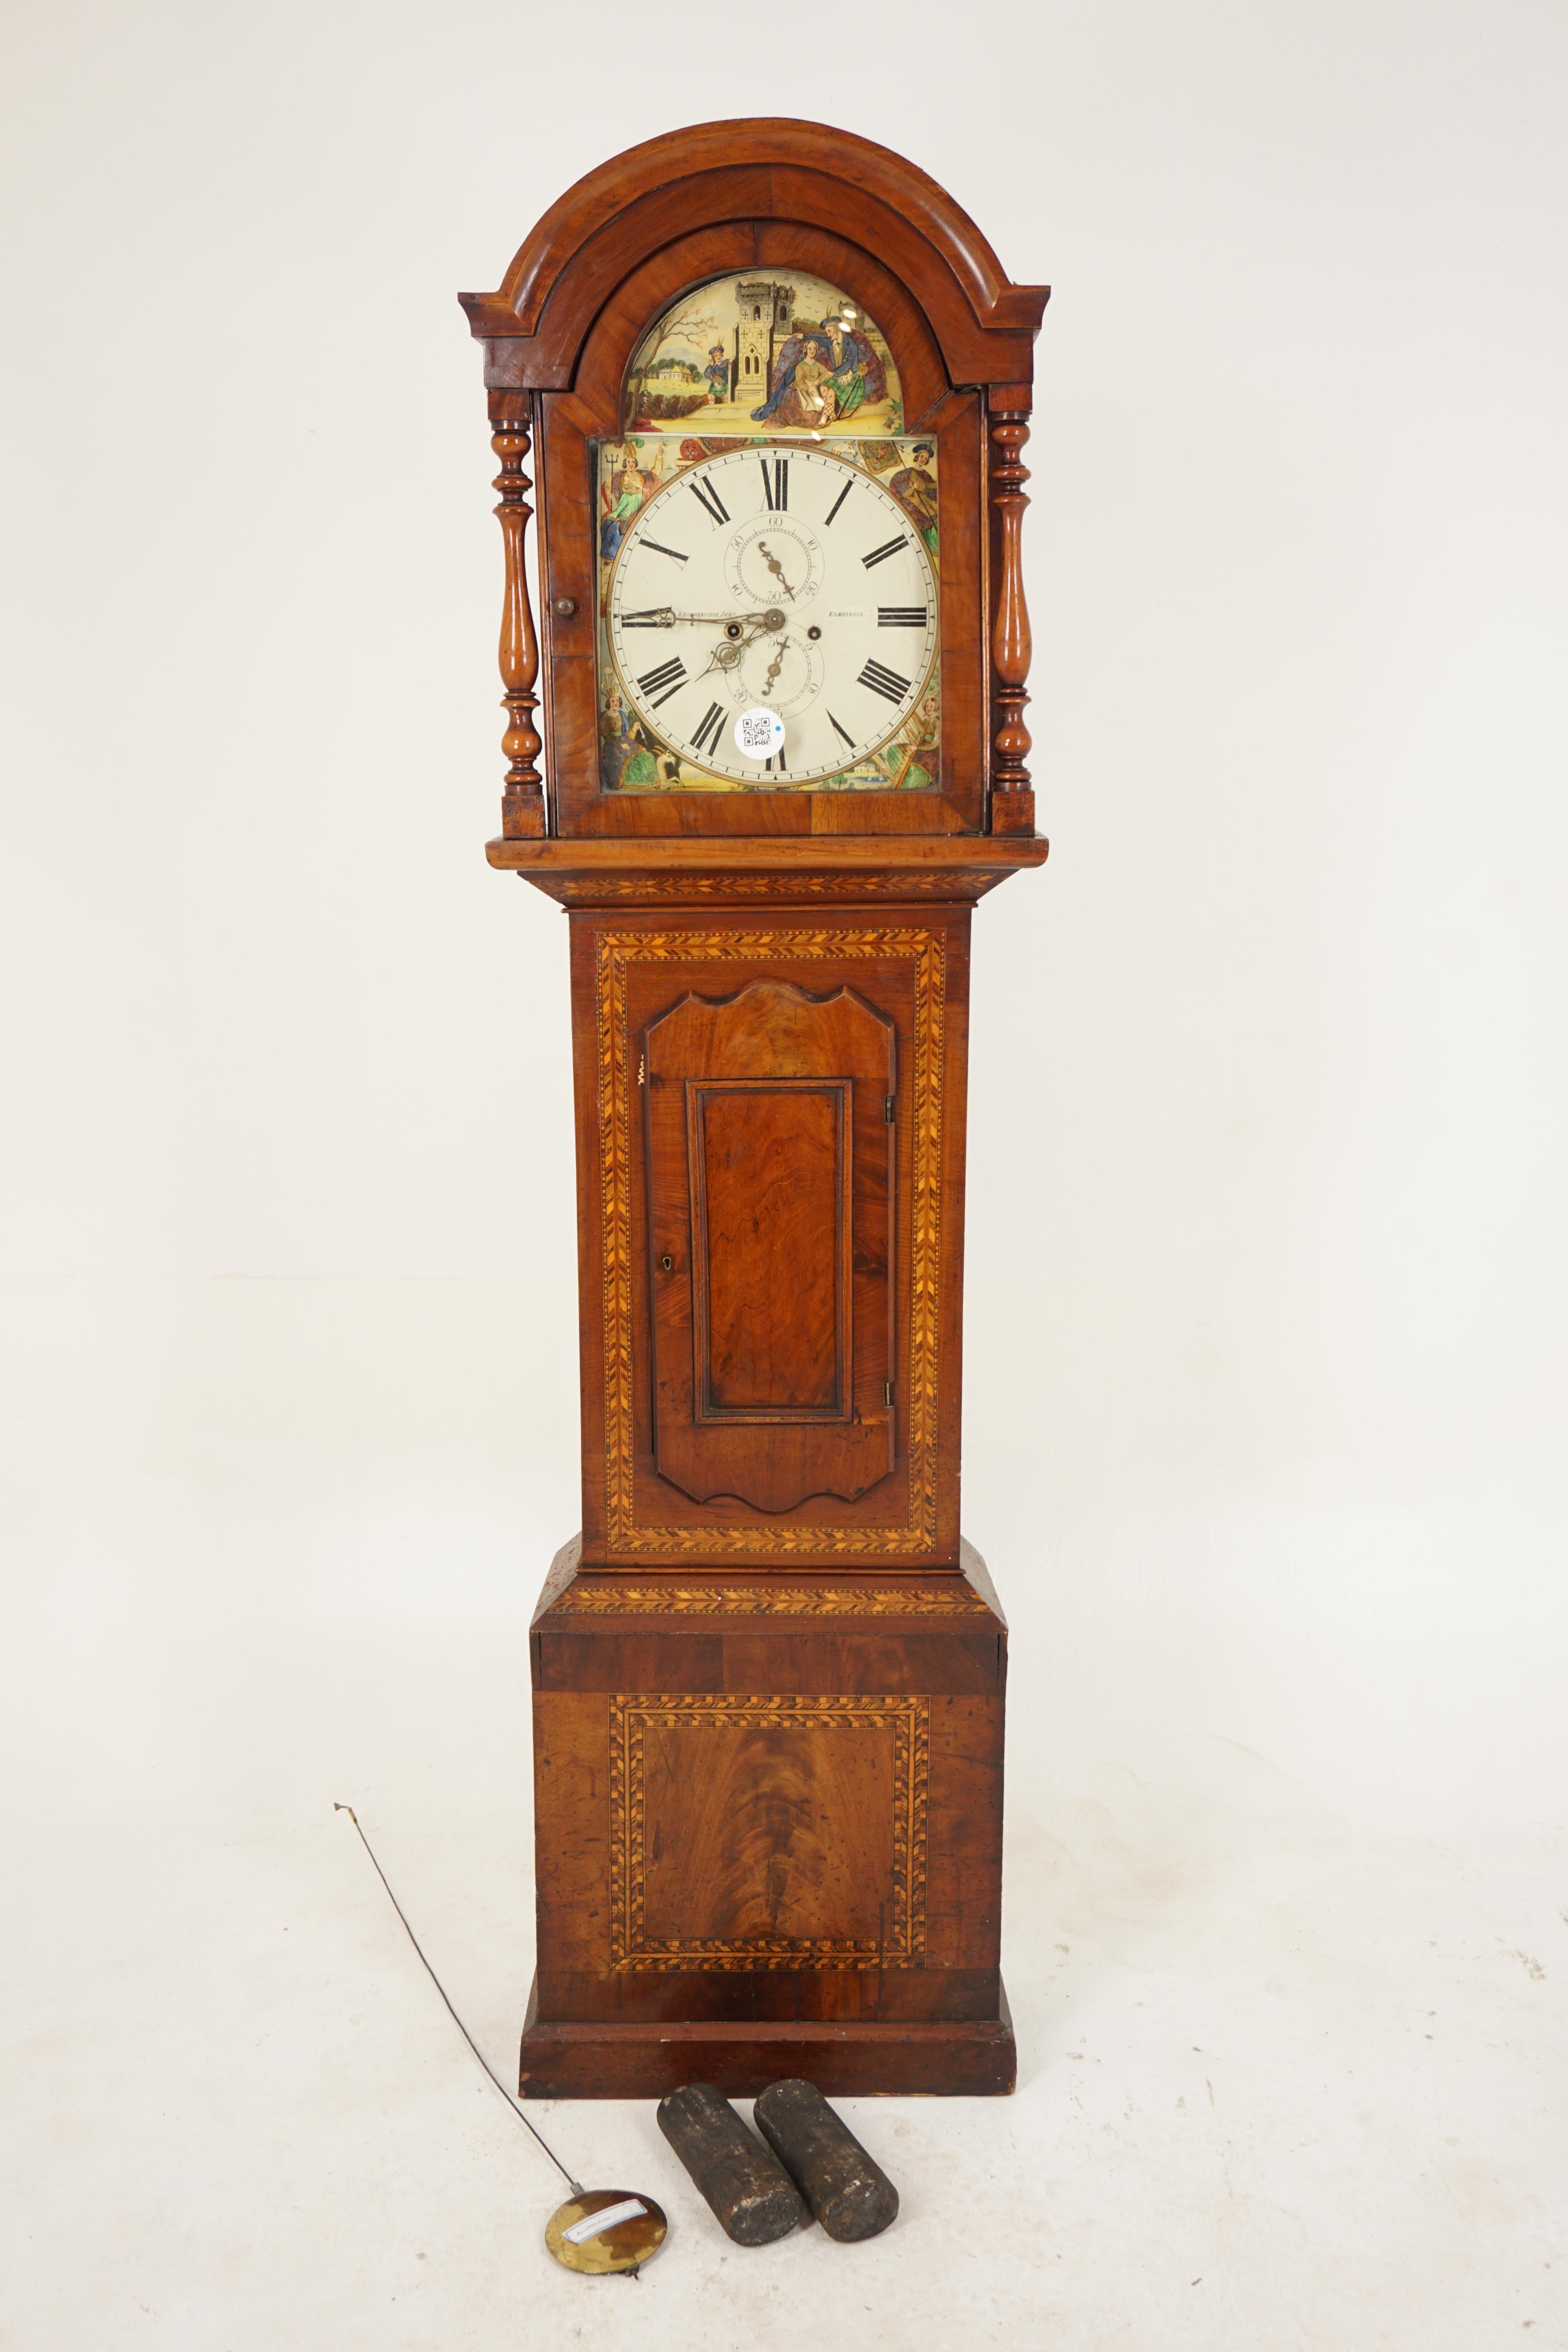 Antique Victorian Grandfather long case clock by a Brackenridge of Kilmarnock, Scotland 1870, H183

Scotland 1870
Solid Walnut
Original Finish
Rounded top 
Arched painted dial
Depicting Scottish castles and crowned kings to each corner
Inlaid